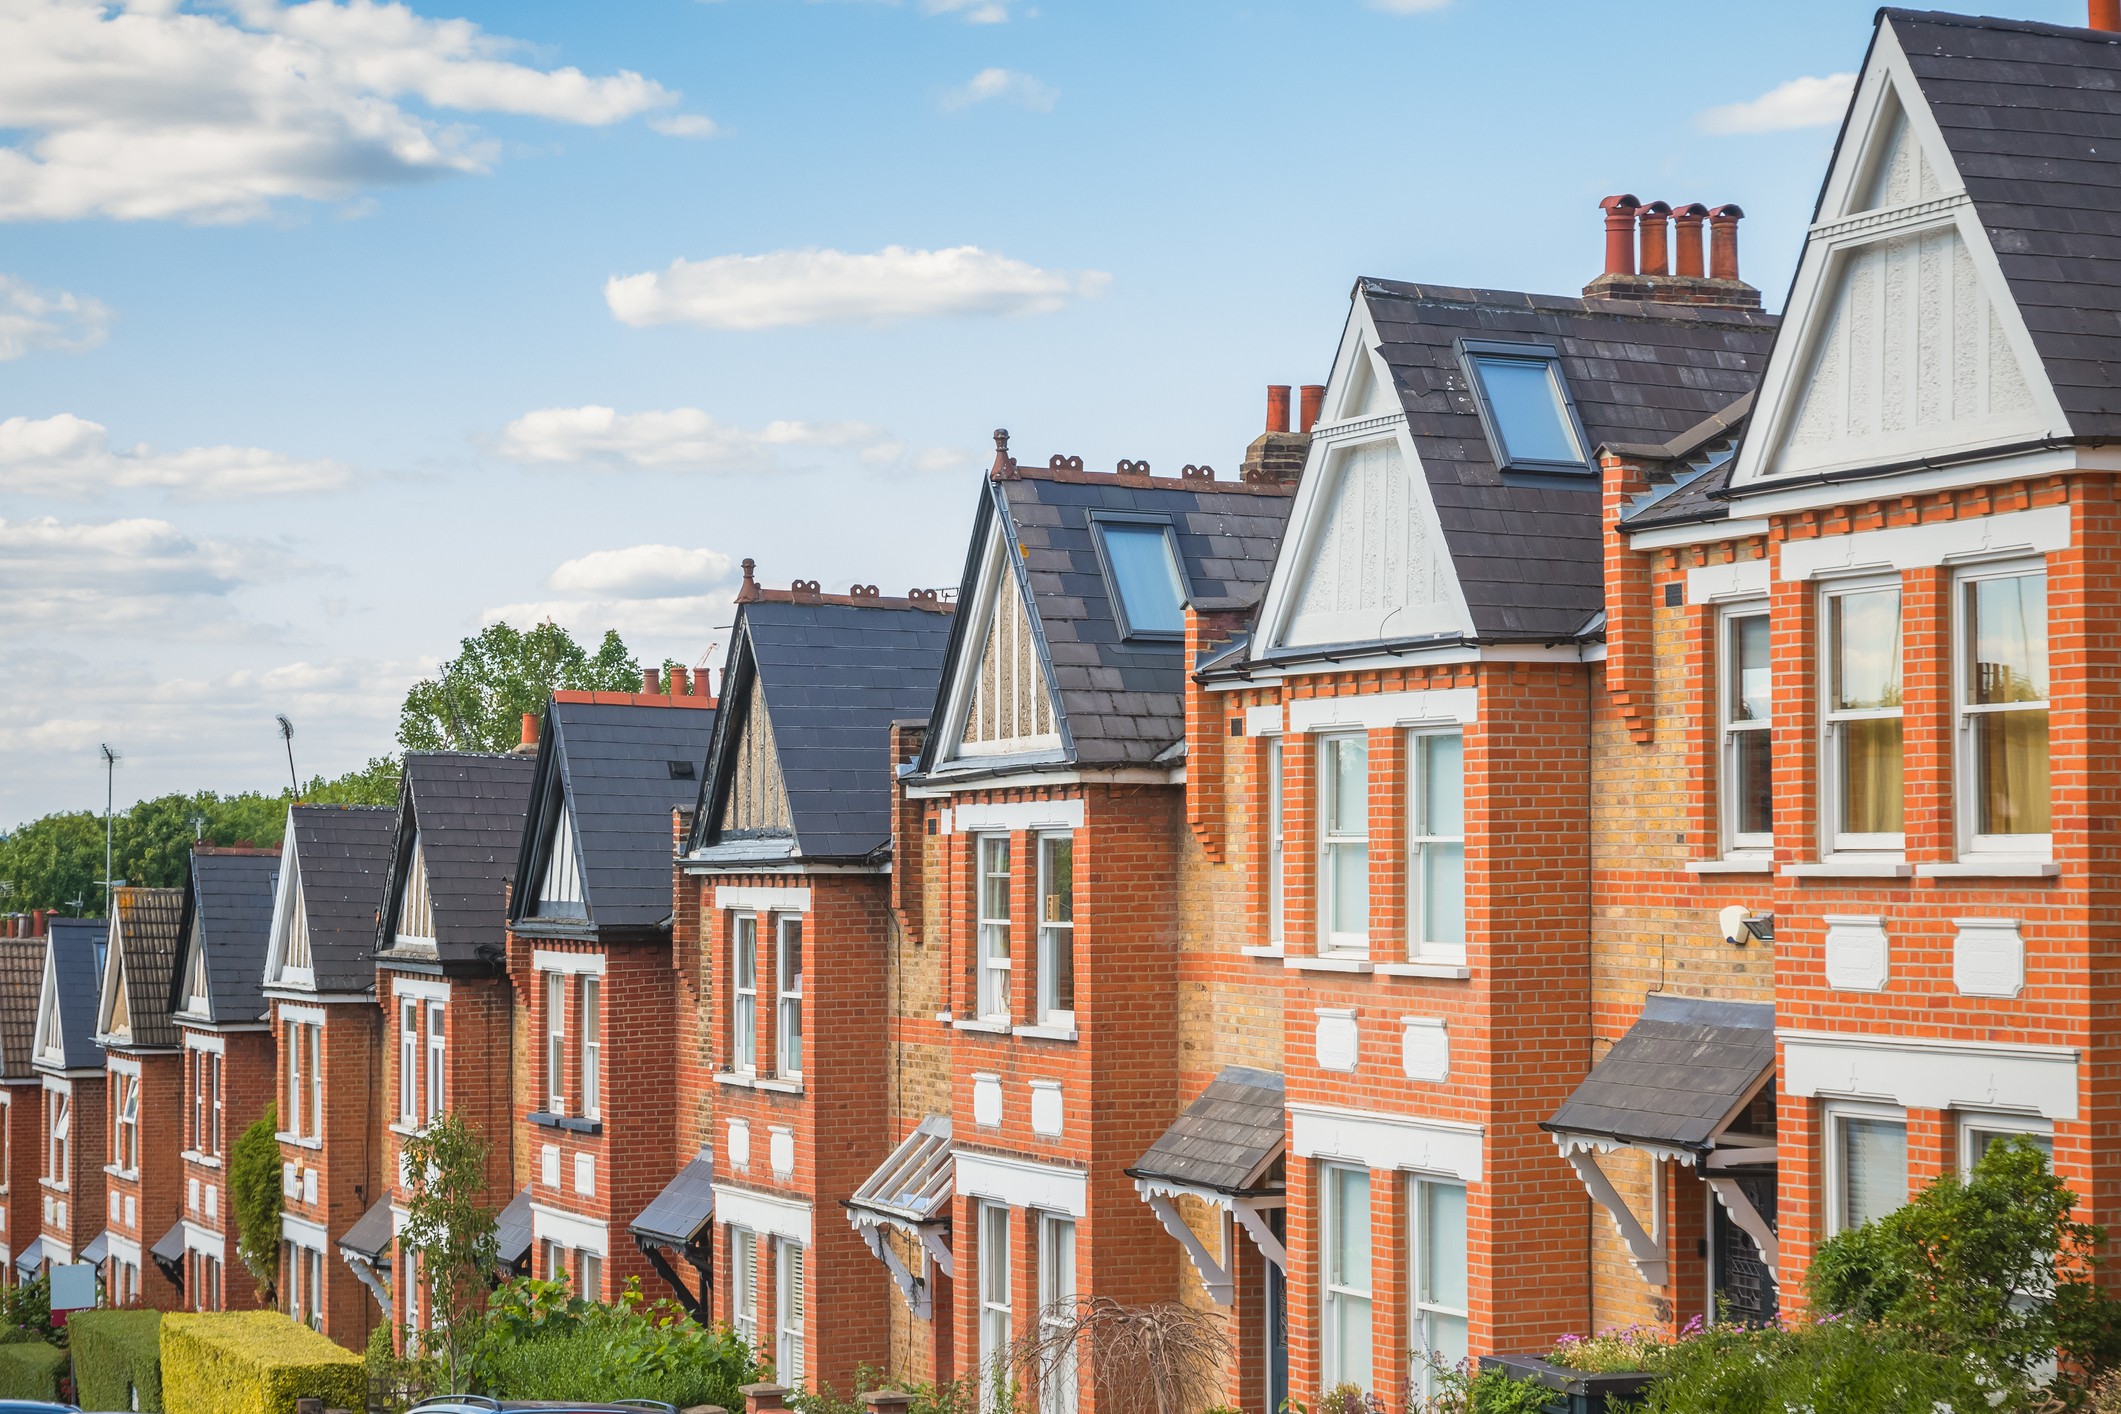 Resilient HMOs in the UK property market